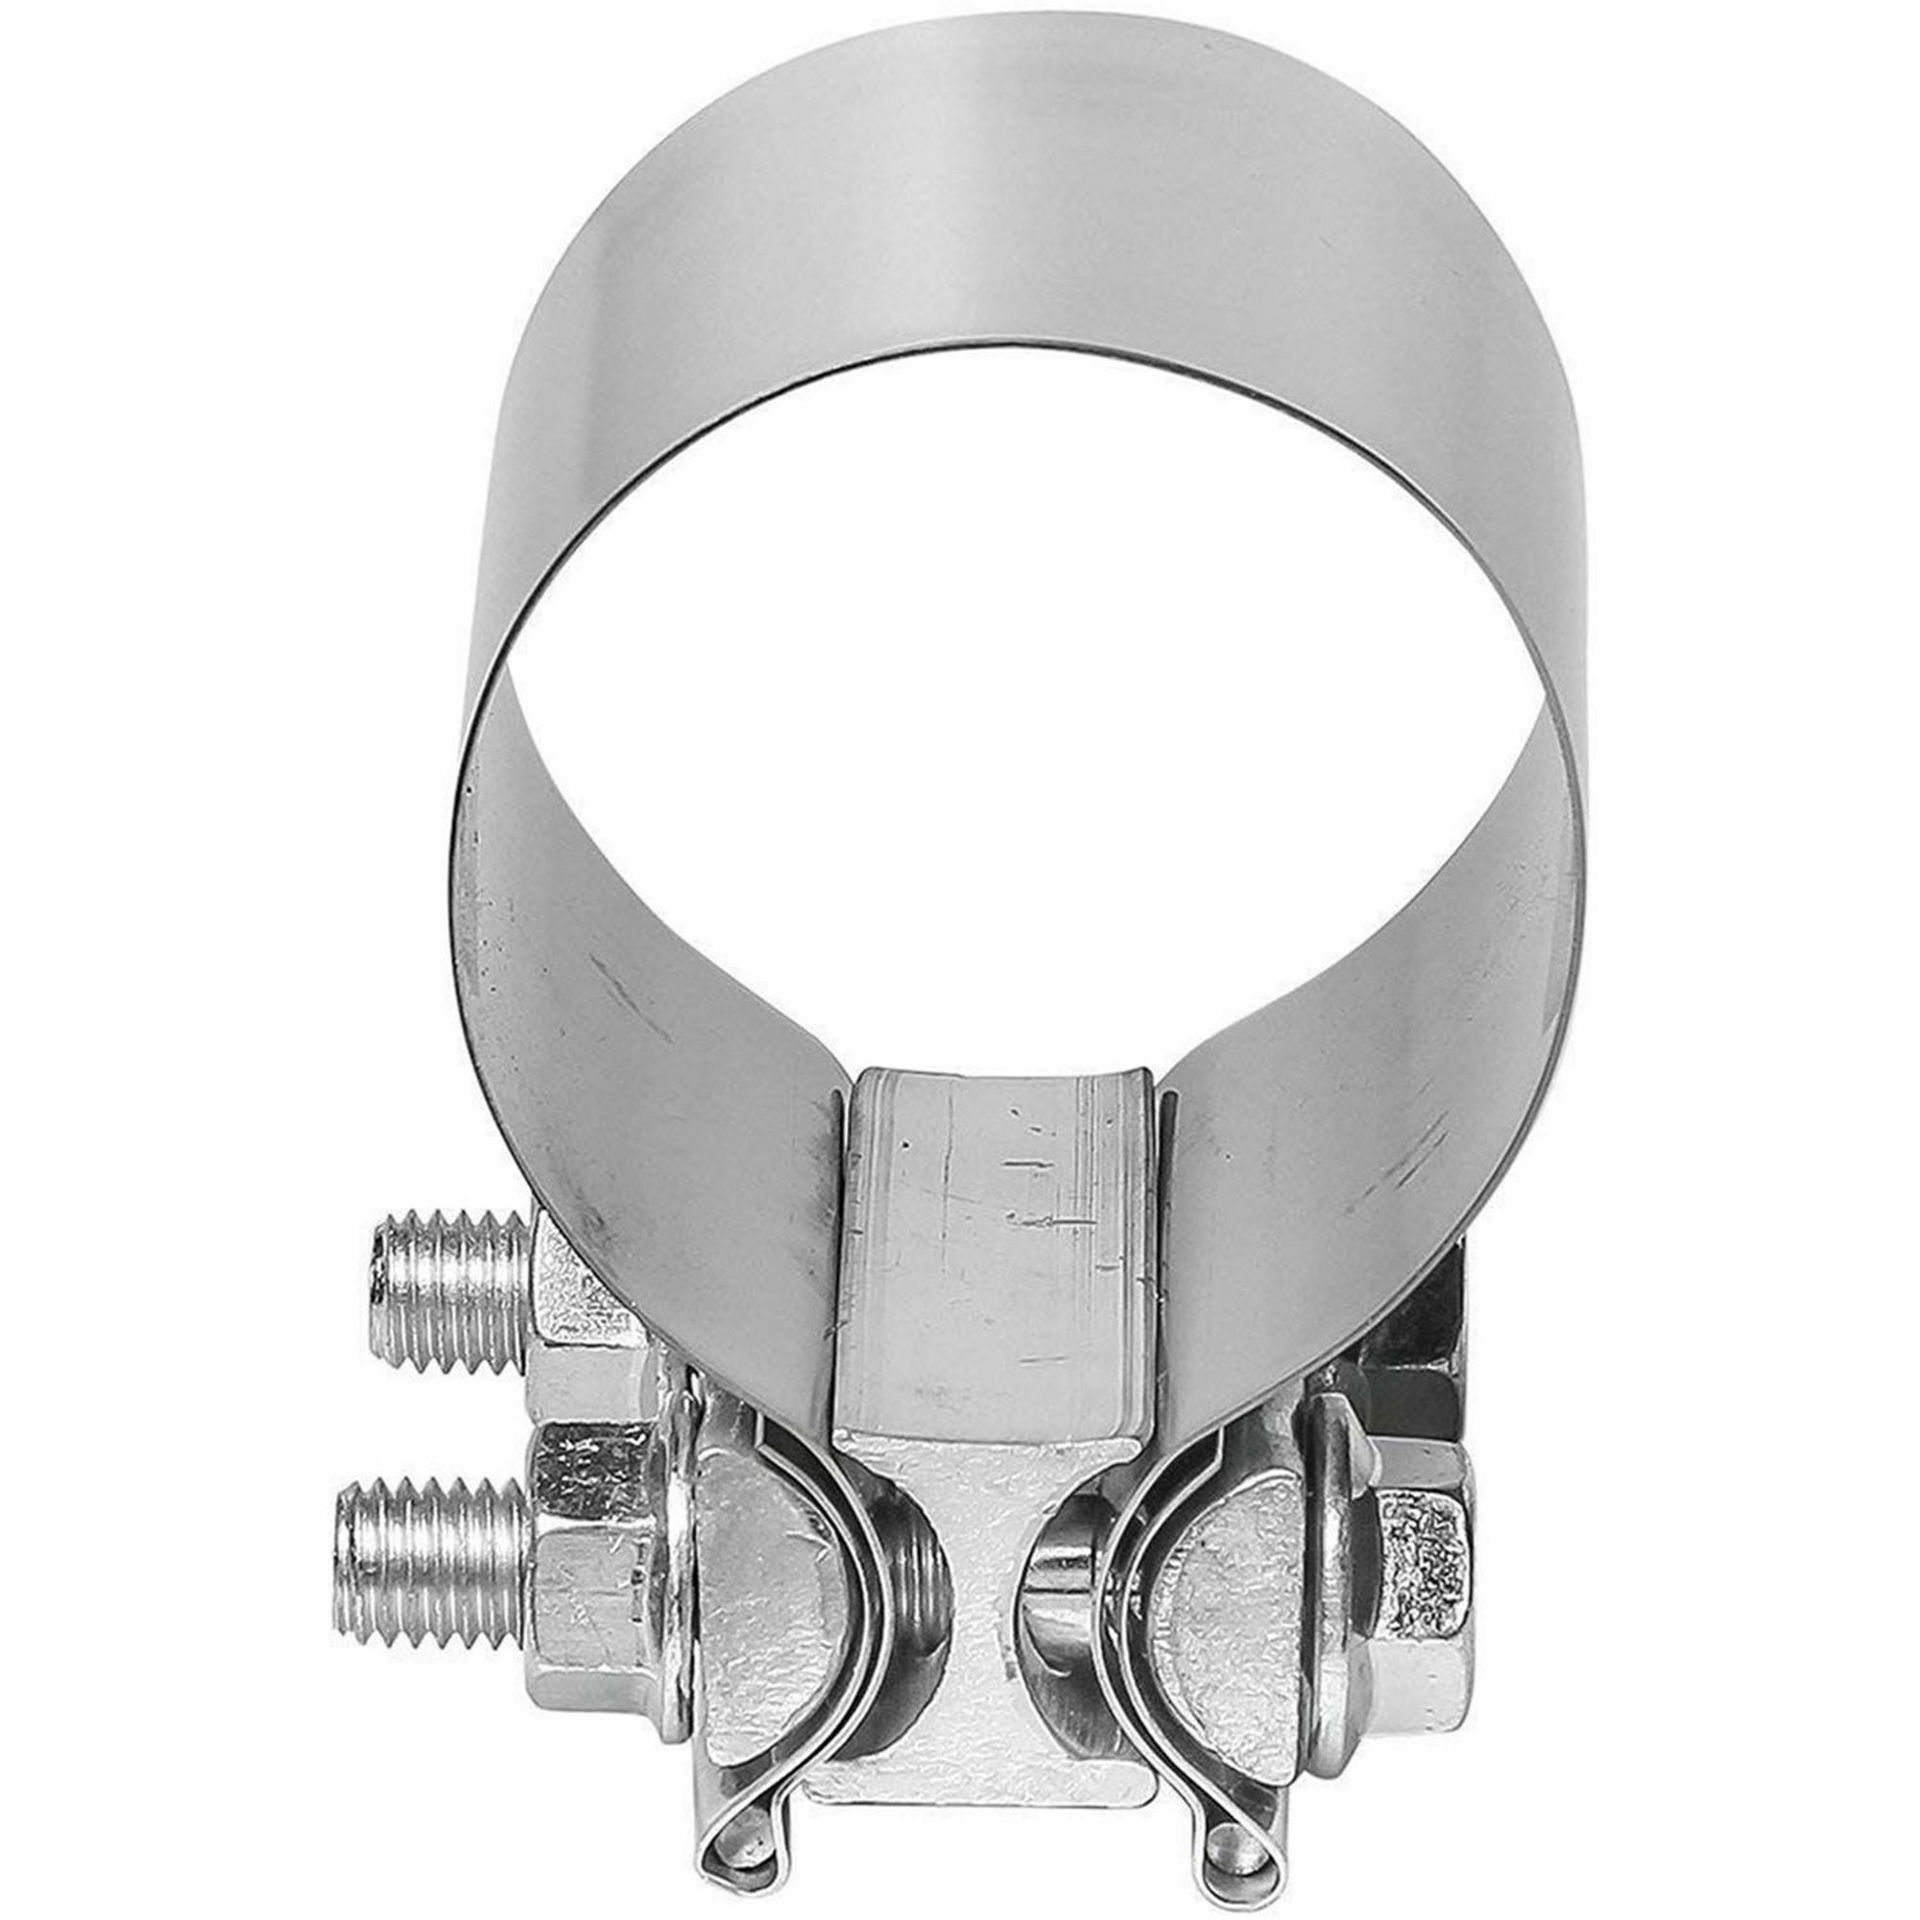 mesome 2.25 Inch Butt Joint Exhaust Band Clamp Sleeve Stainless Steel 